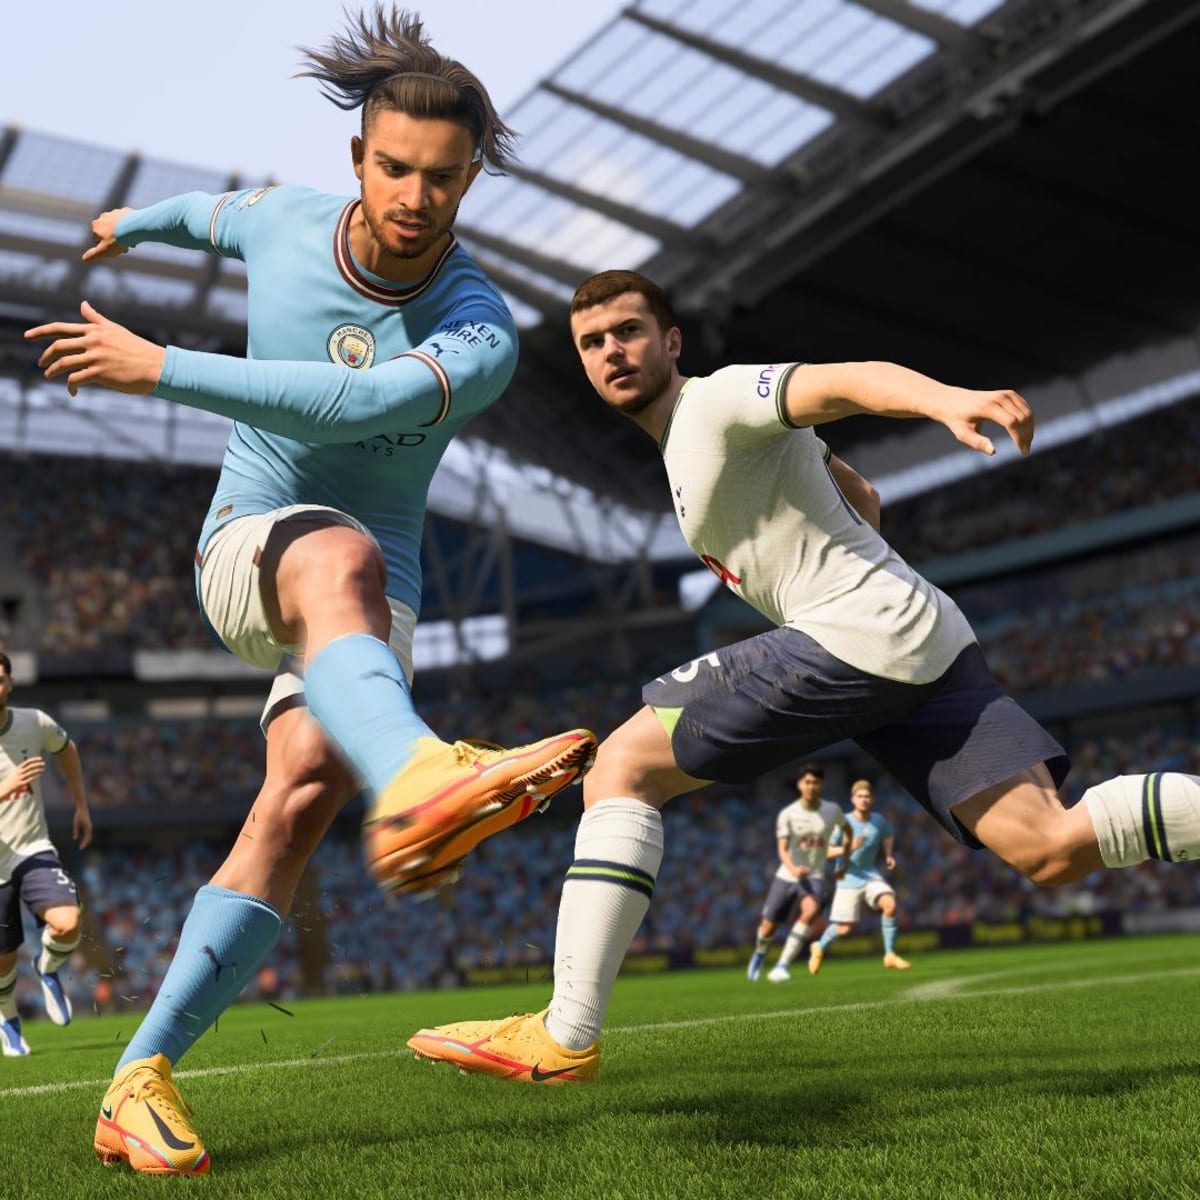 EA Sports Release Ultimate FIFA Soundtrack To Celebrate World Cup Mode